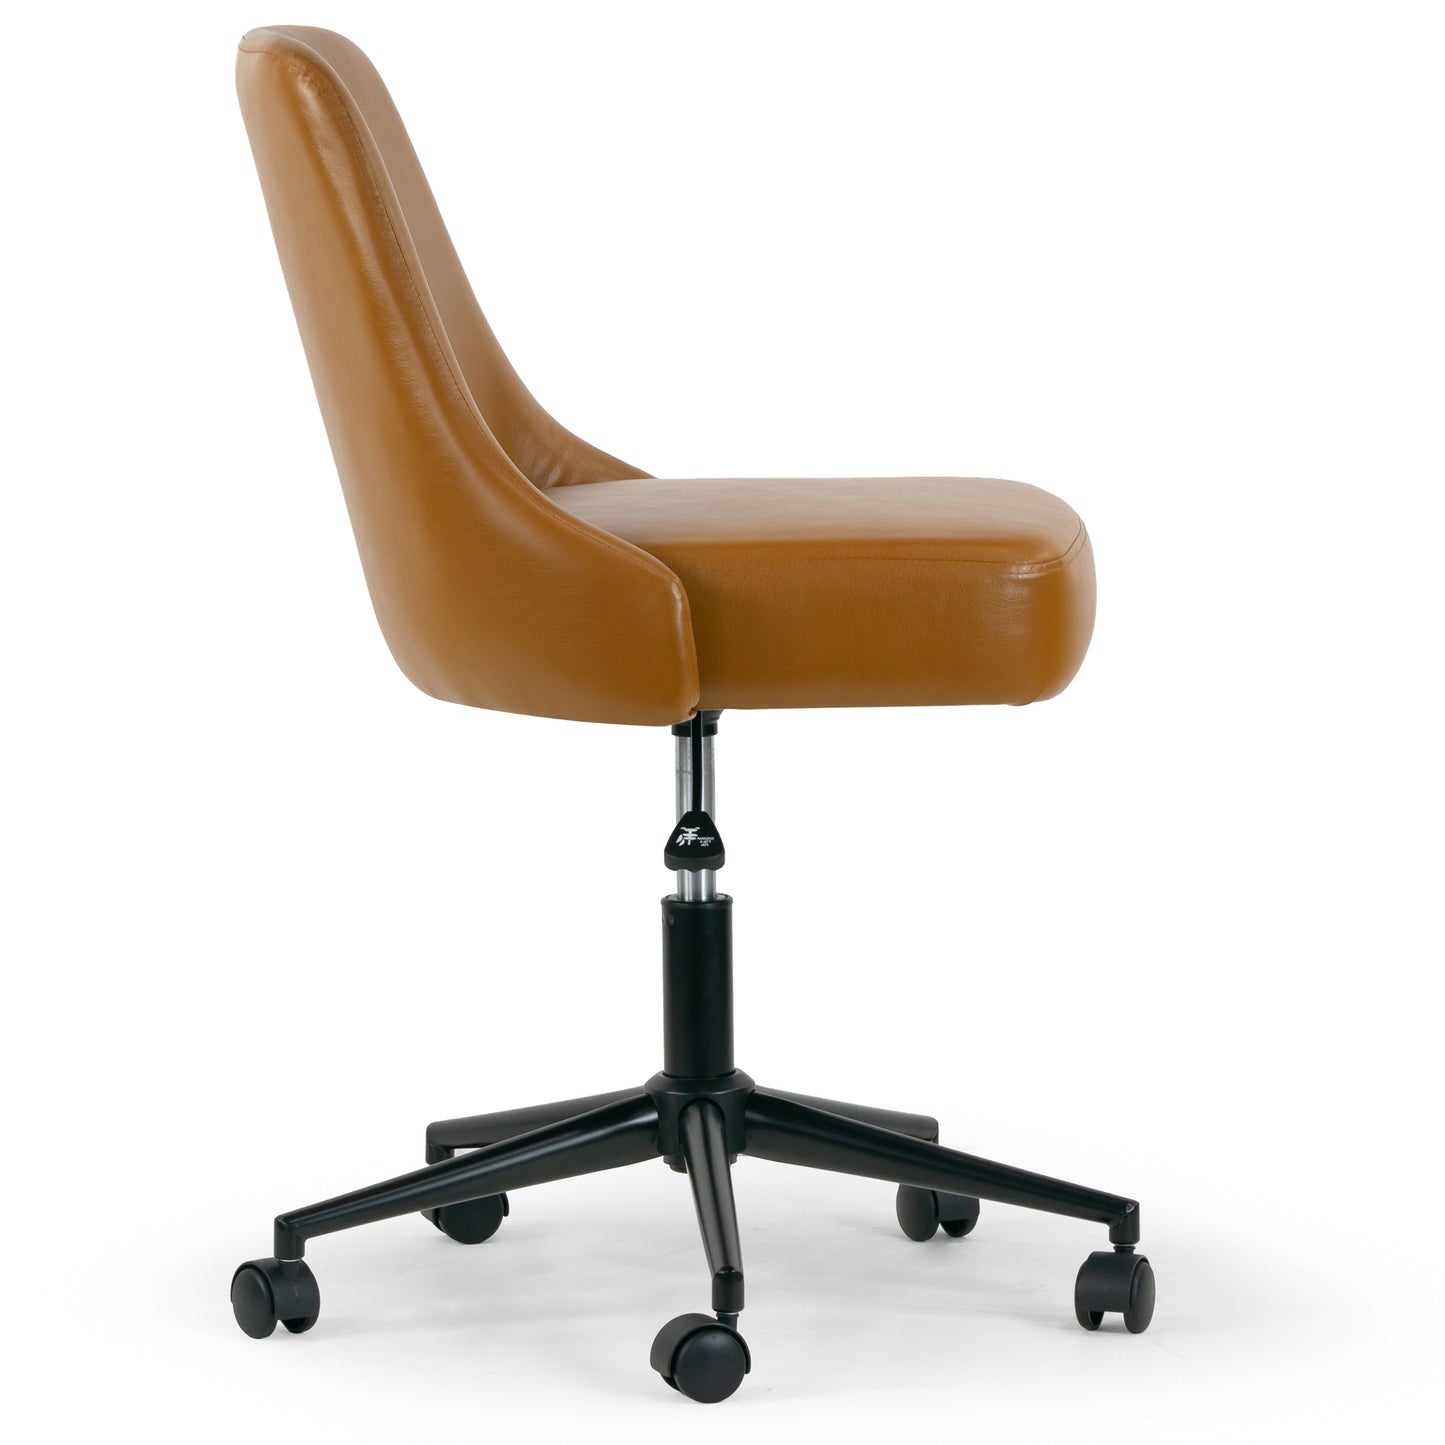 Aurica Light Brown Faux Leather Adjustable Height Swivel Office Chair with Wheel Base